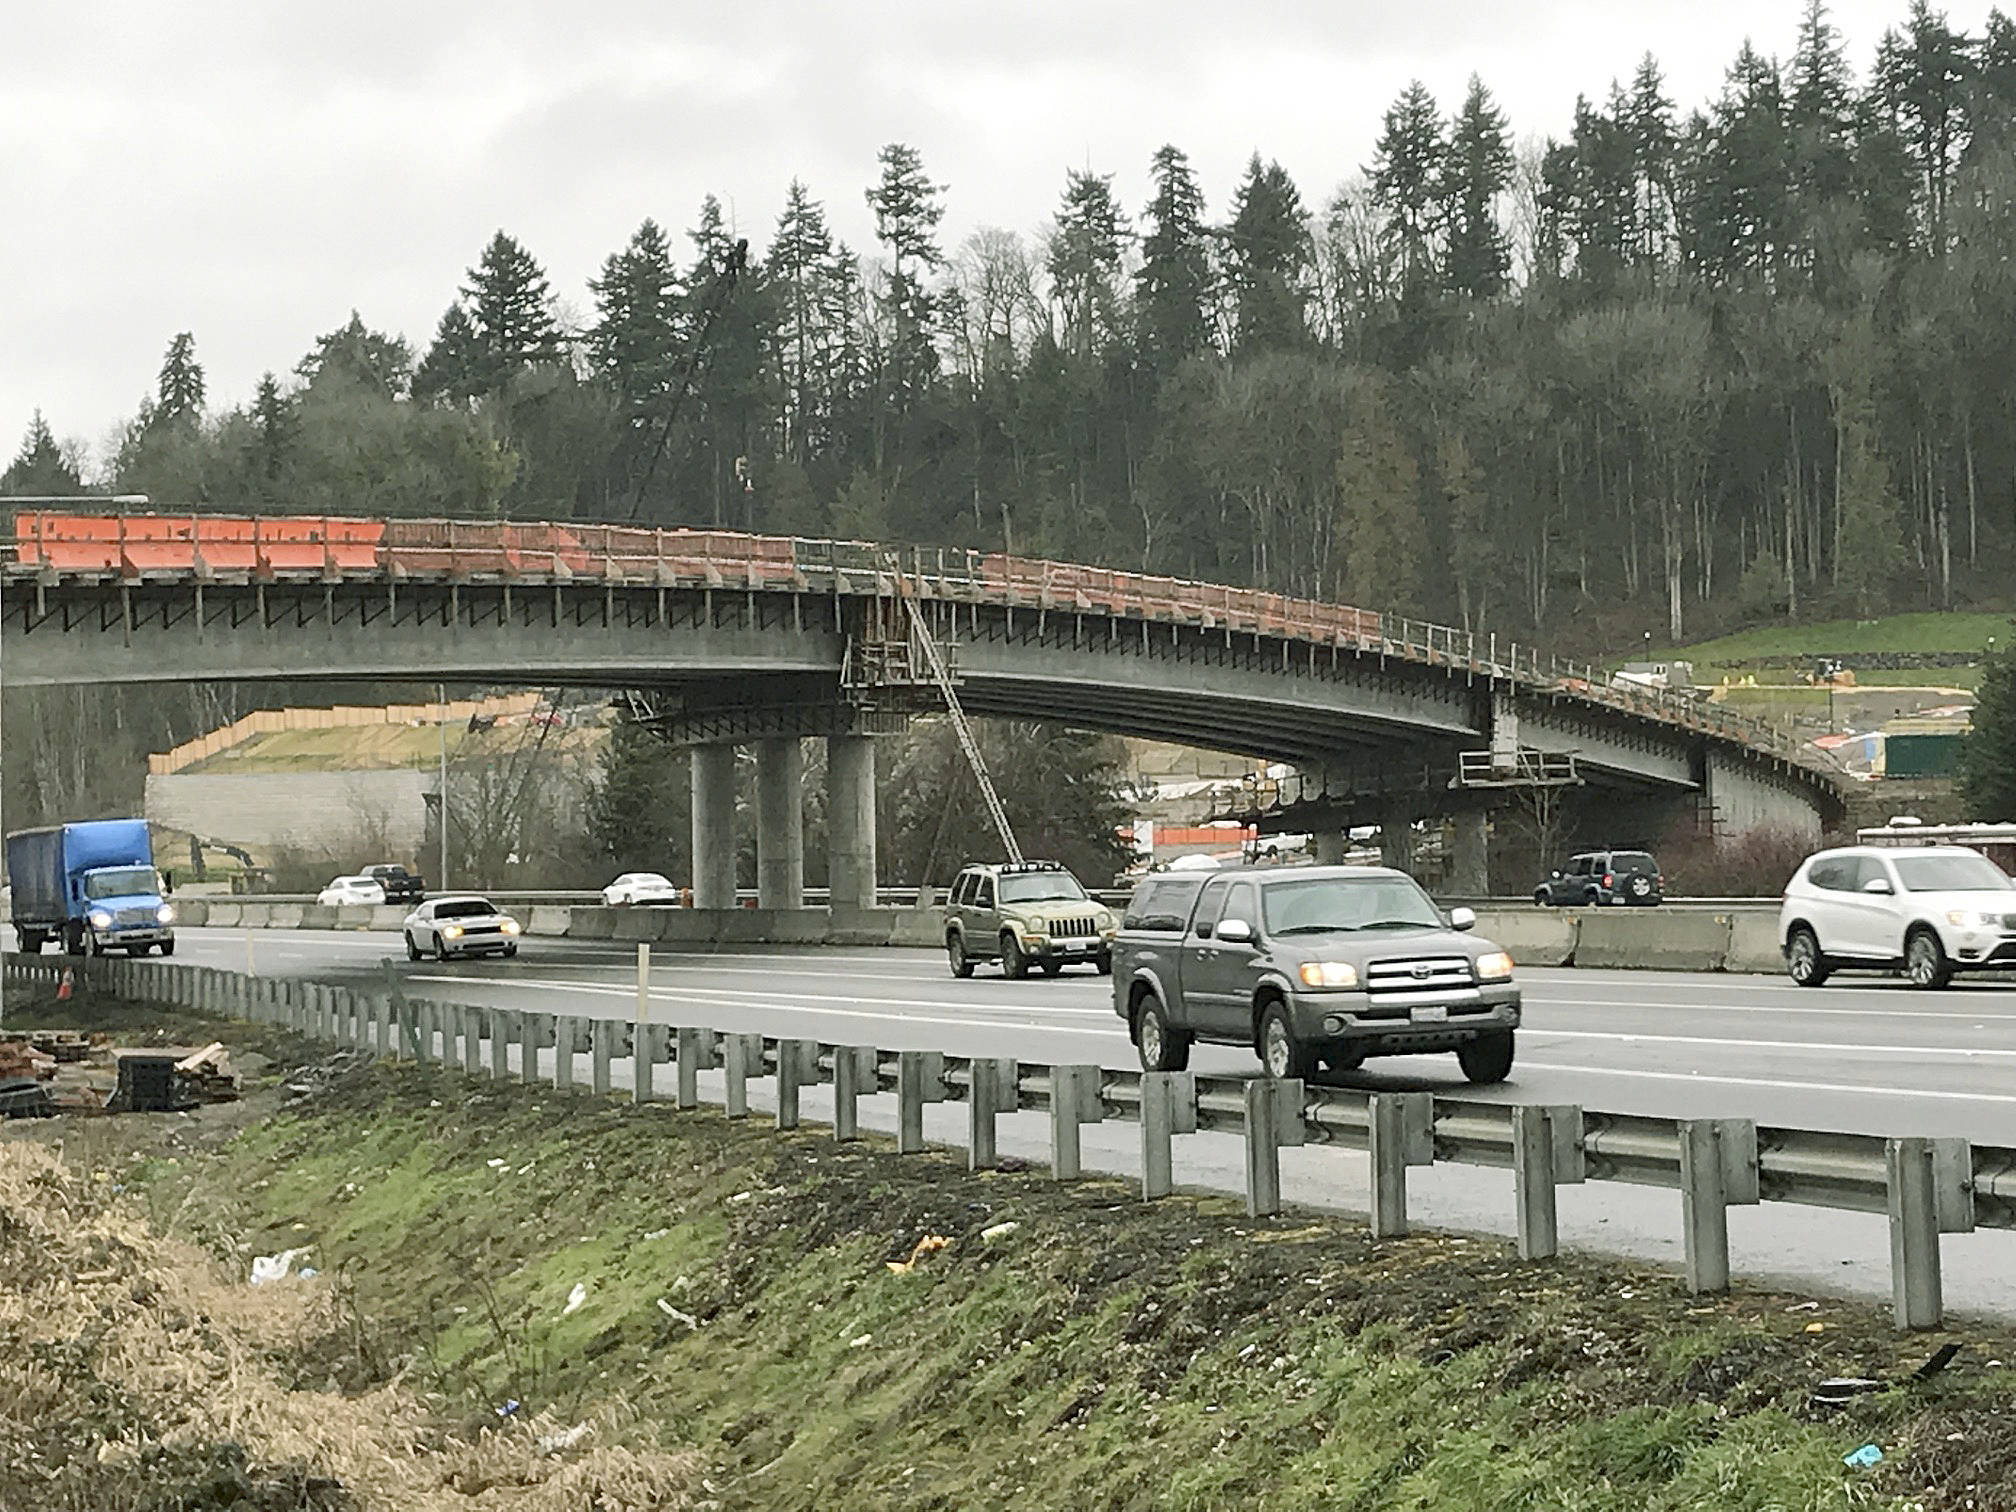 Crews work Tuesday on the new overpass over Highway 167 that will help extend the city of Kent’s South 224th/228th corridor between the Valley and the East Hill. MARK KLAAS, Kent Reporter